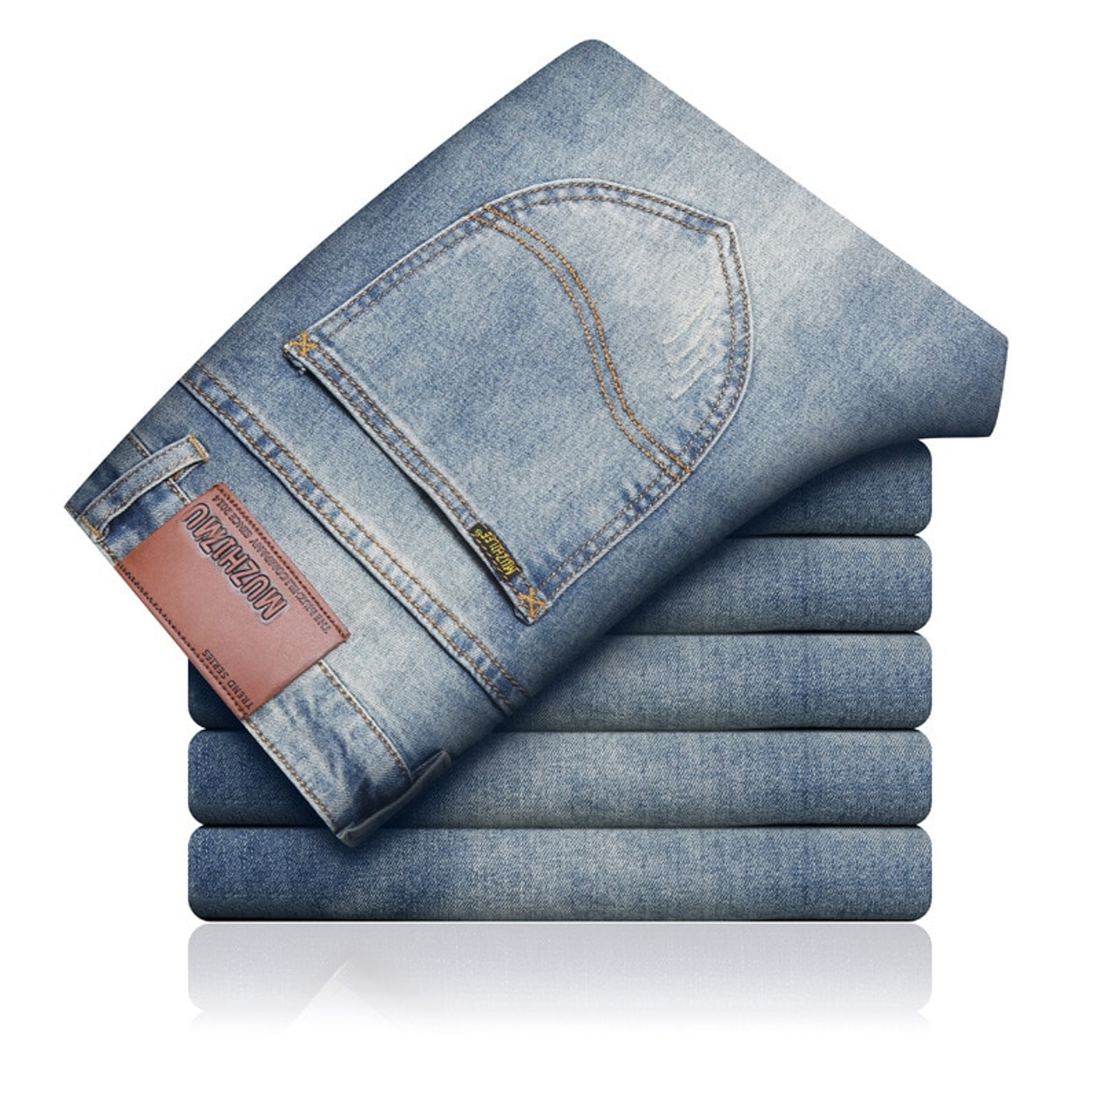 Men's Stretchy Straight Jeans